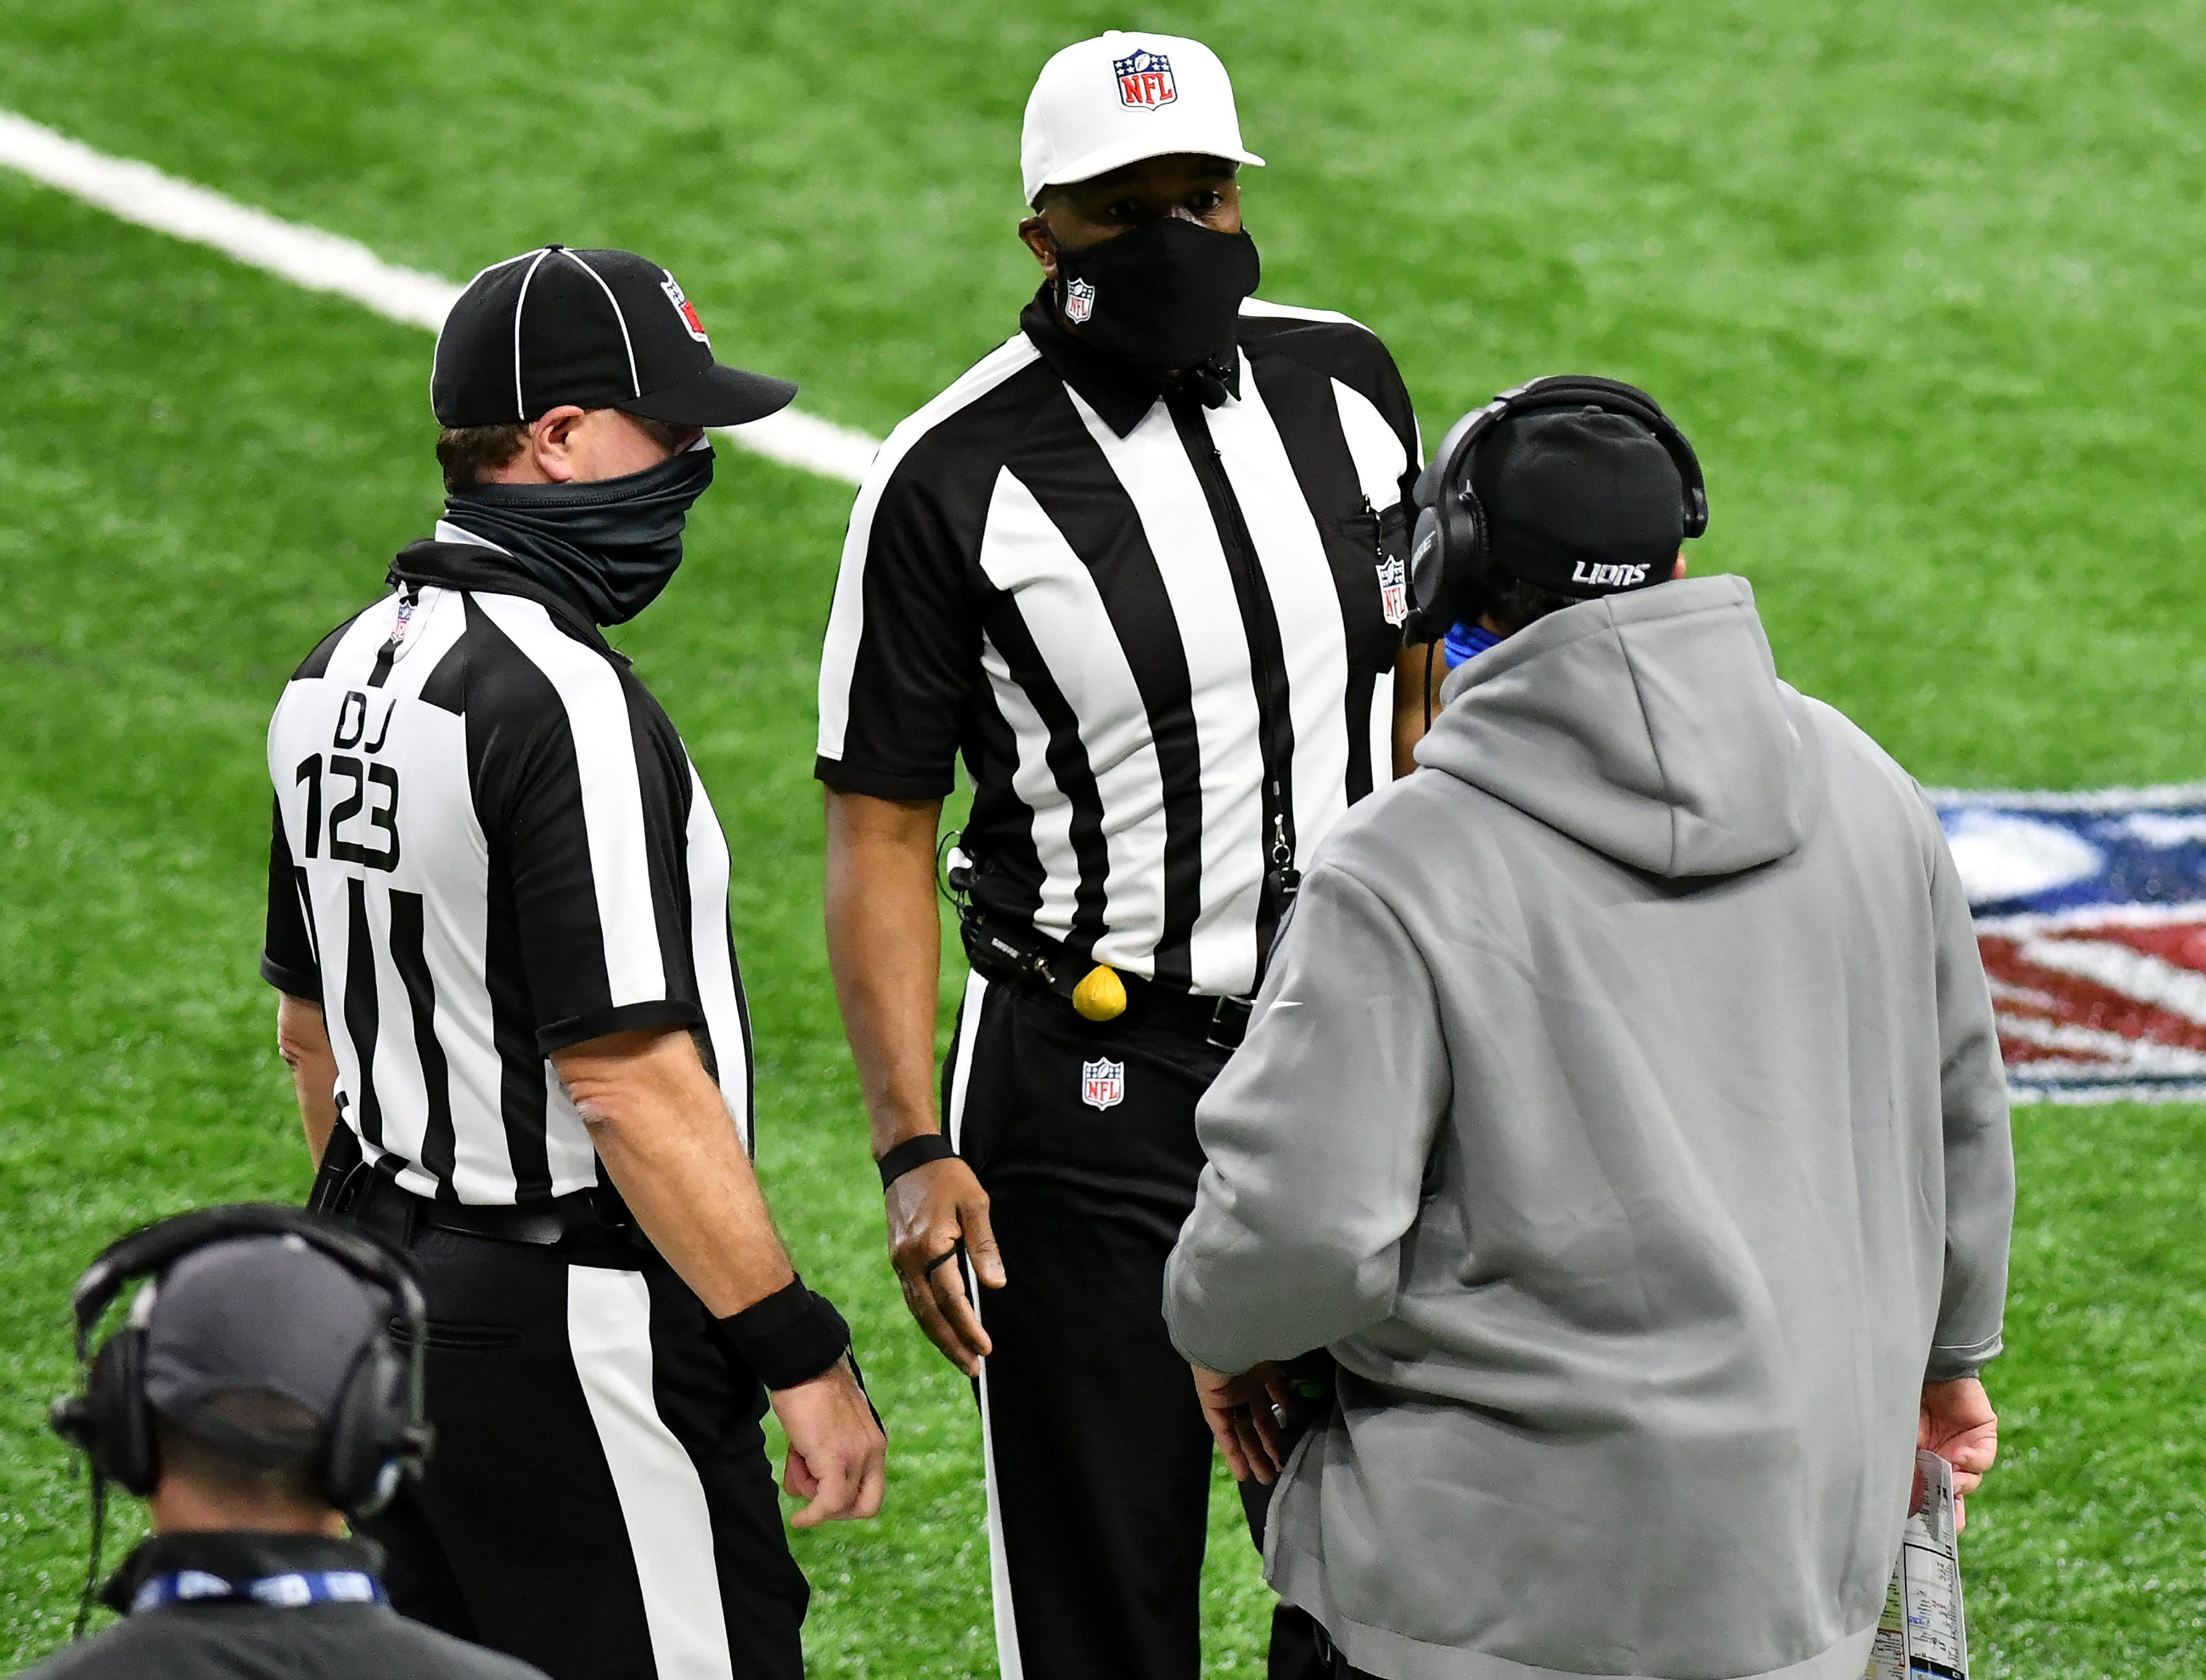 Officials talk with Lions head coach Matt Patricia after Patricia challenges a ruling on an attempted catch by Matthew Stafford in the third quarter.